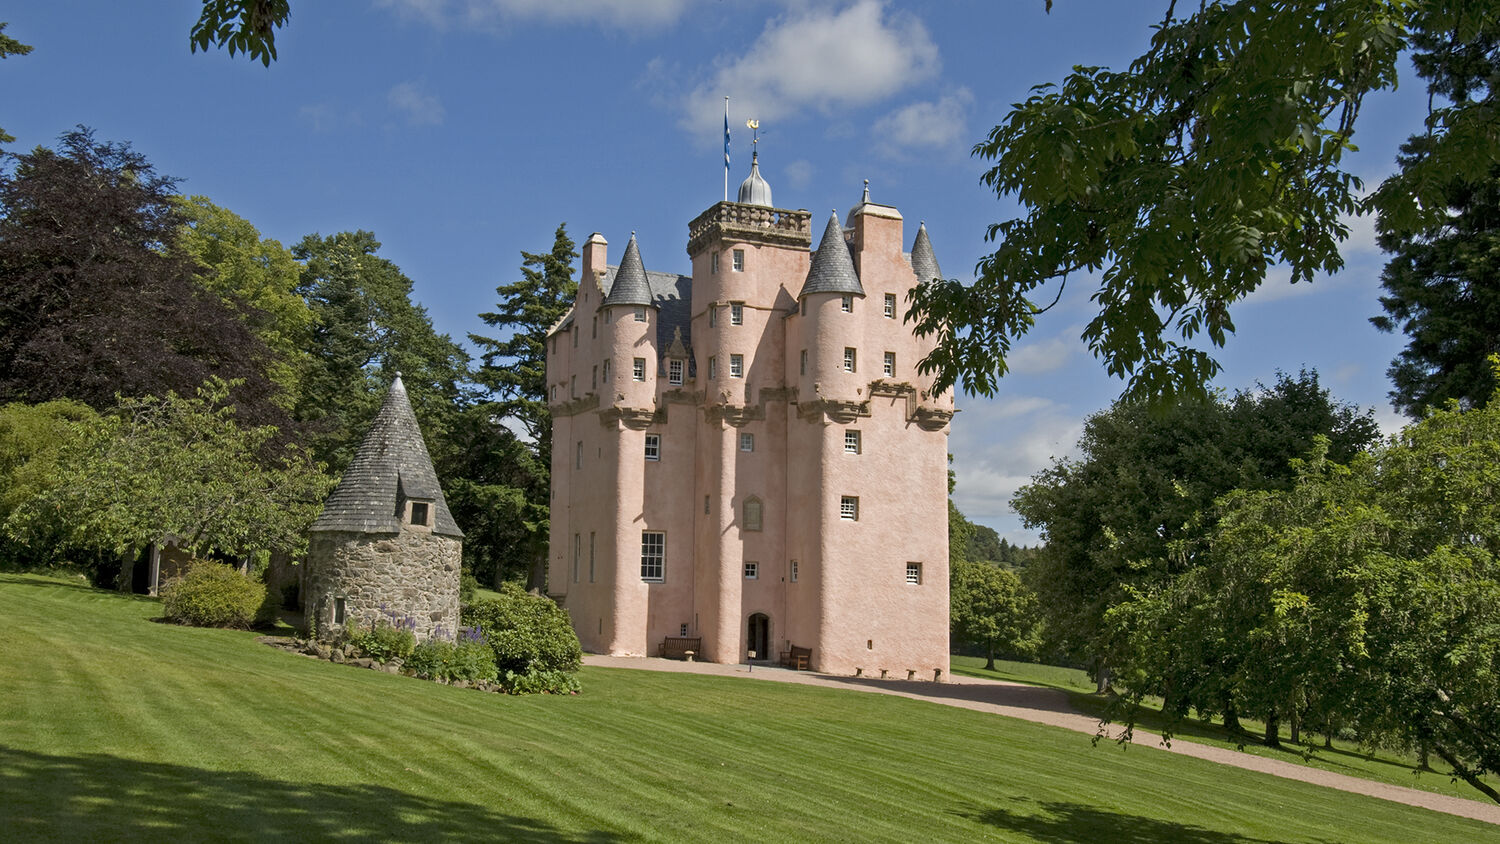 Craigievar Castle, a pink castle with turrets surrounded by a grassy lawn, with trees in the background.